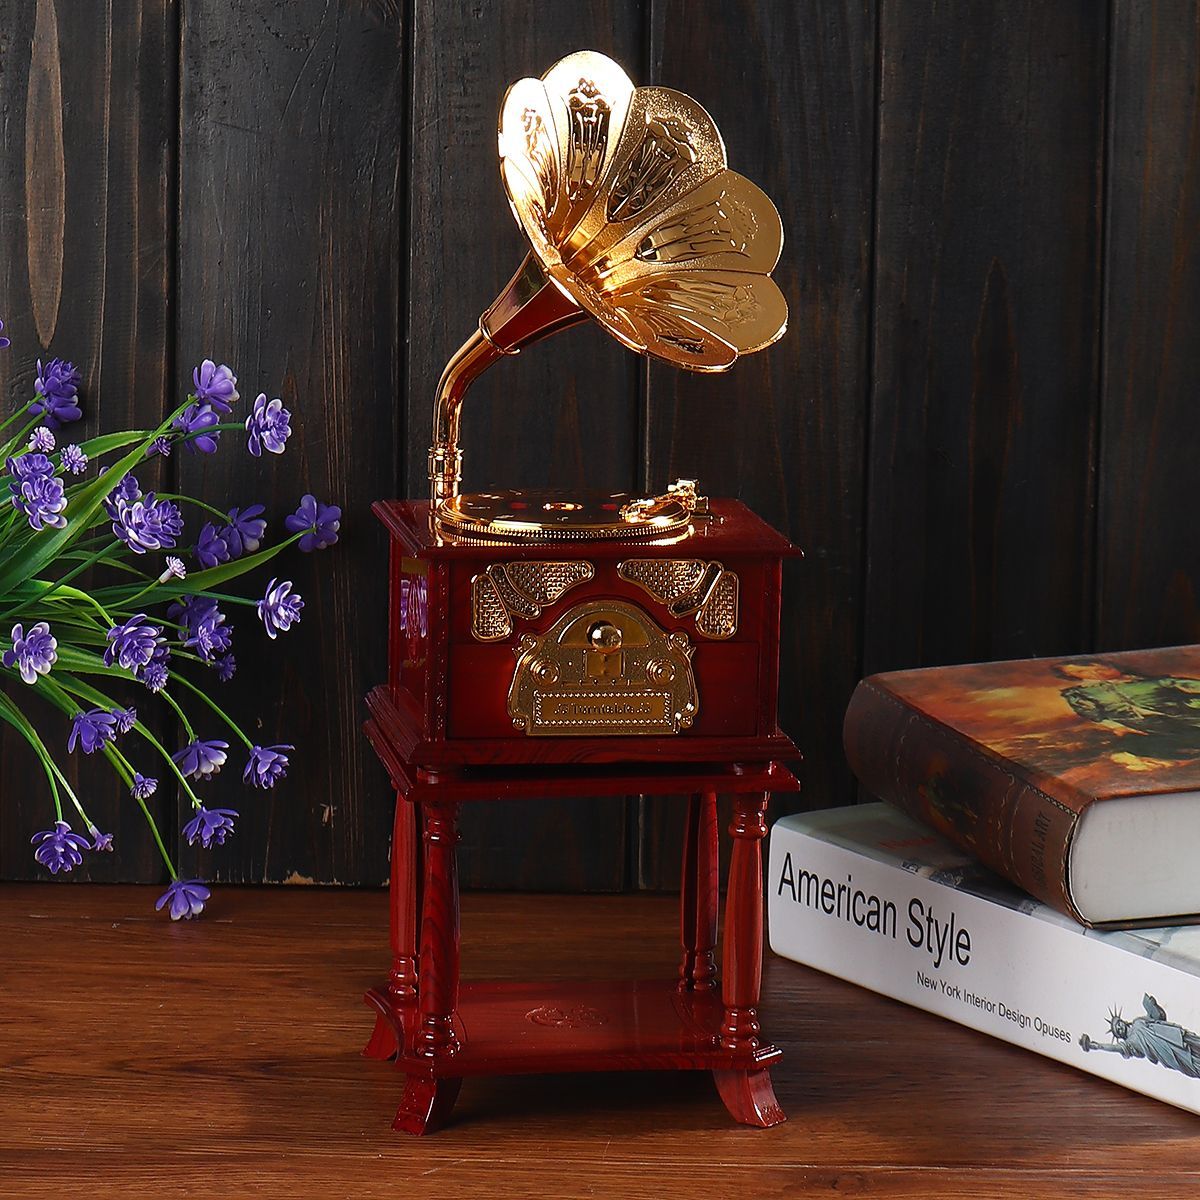 Vintage-Phonograph-Music-Box-Crafts-Simulation-Home-Ornaments-Gift-Bedroom-Decor-1630530